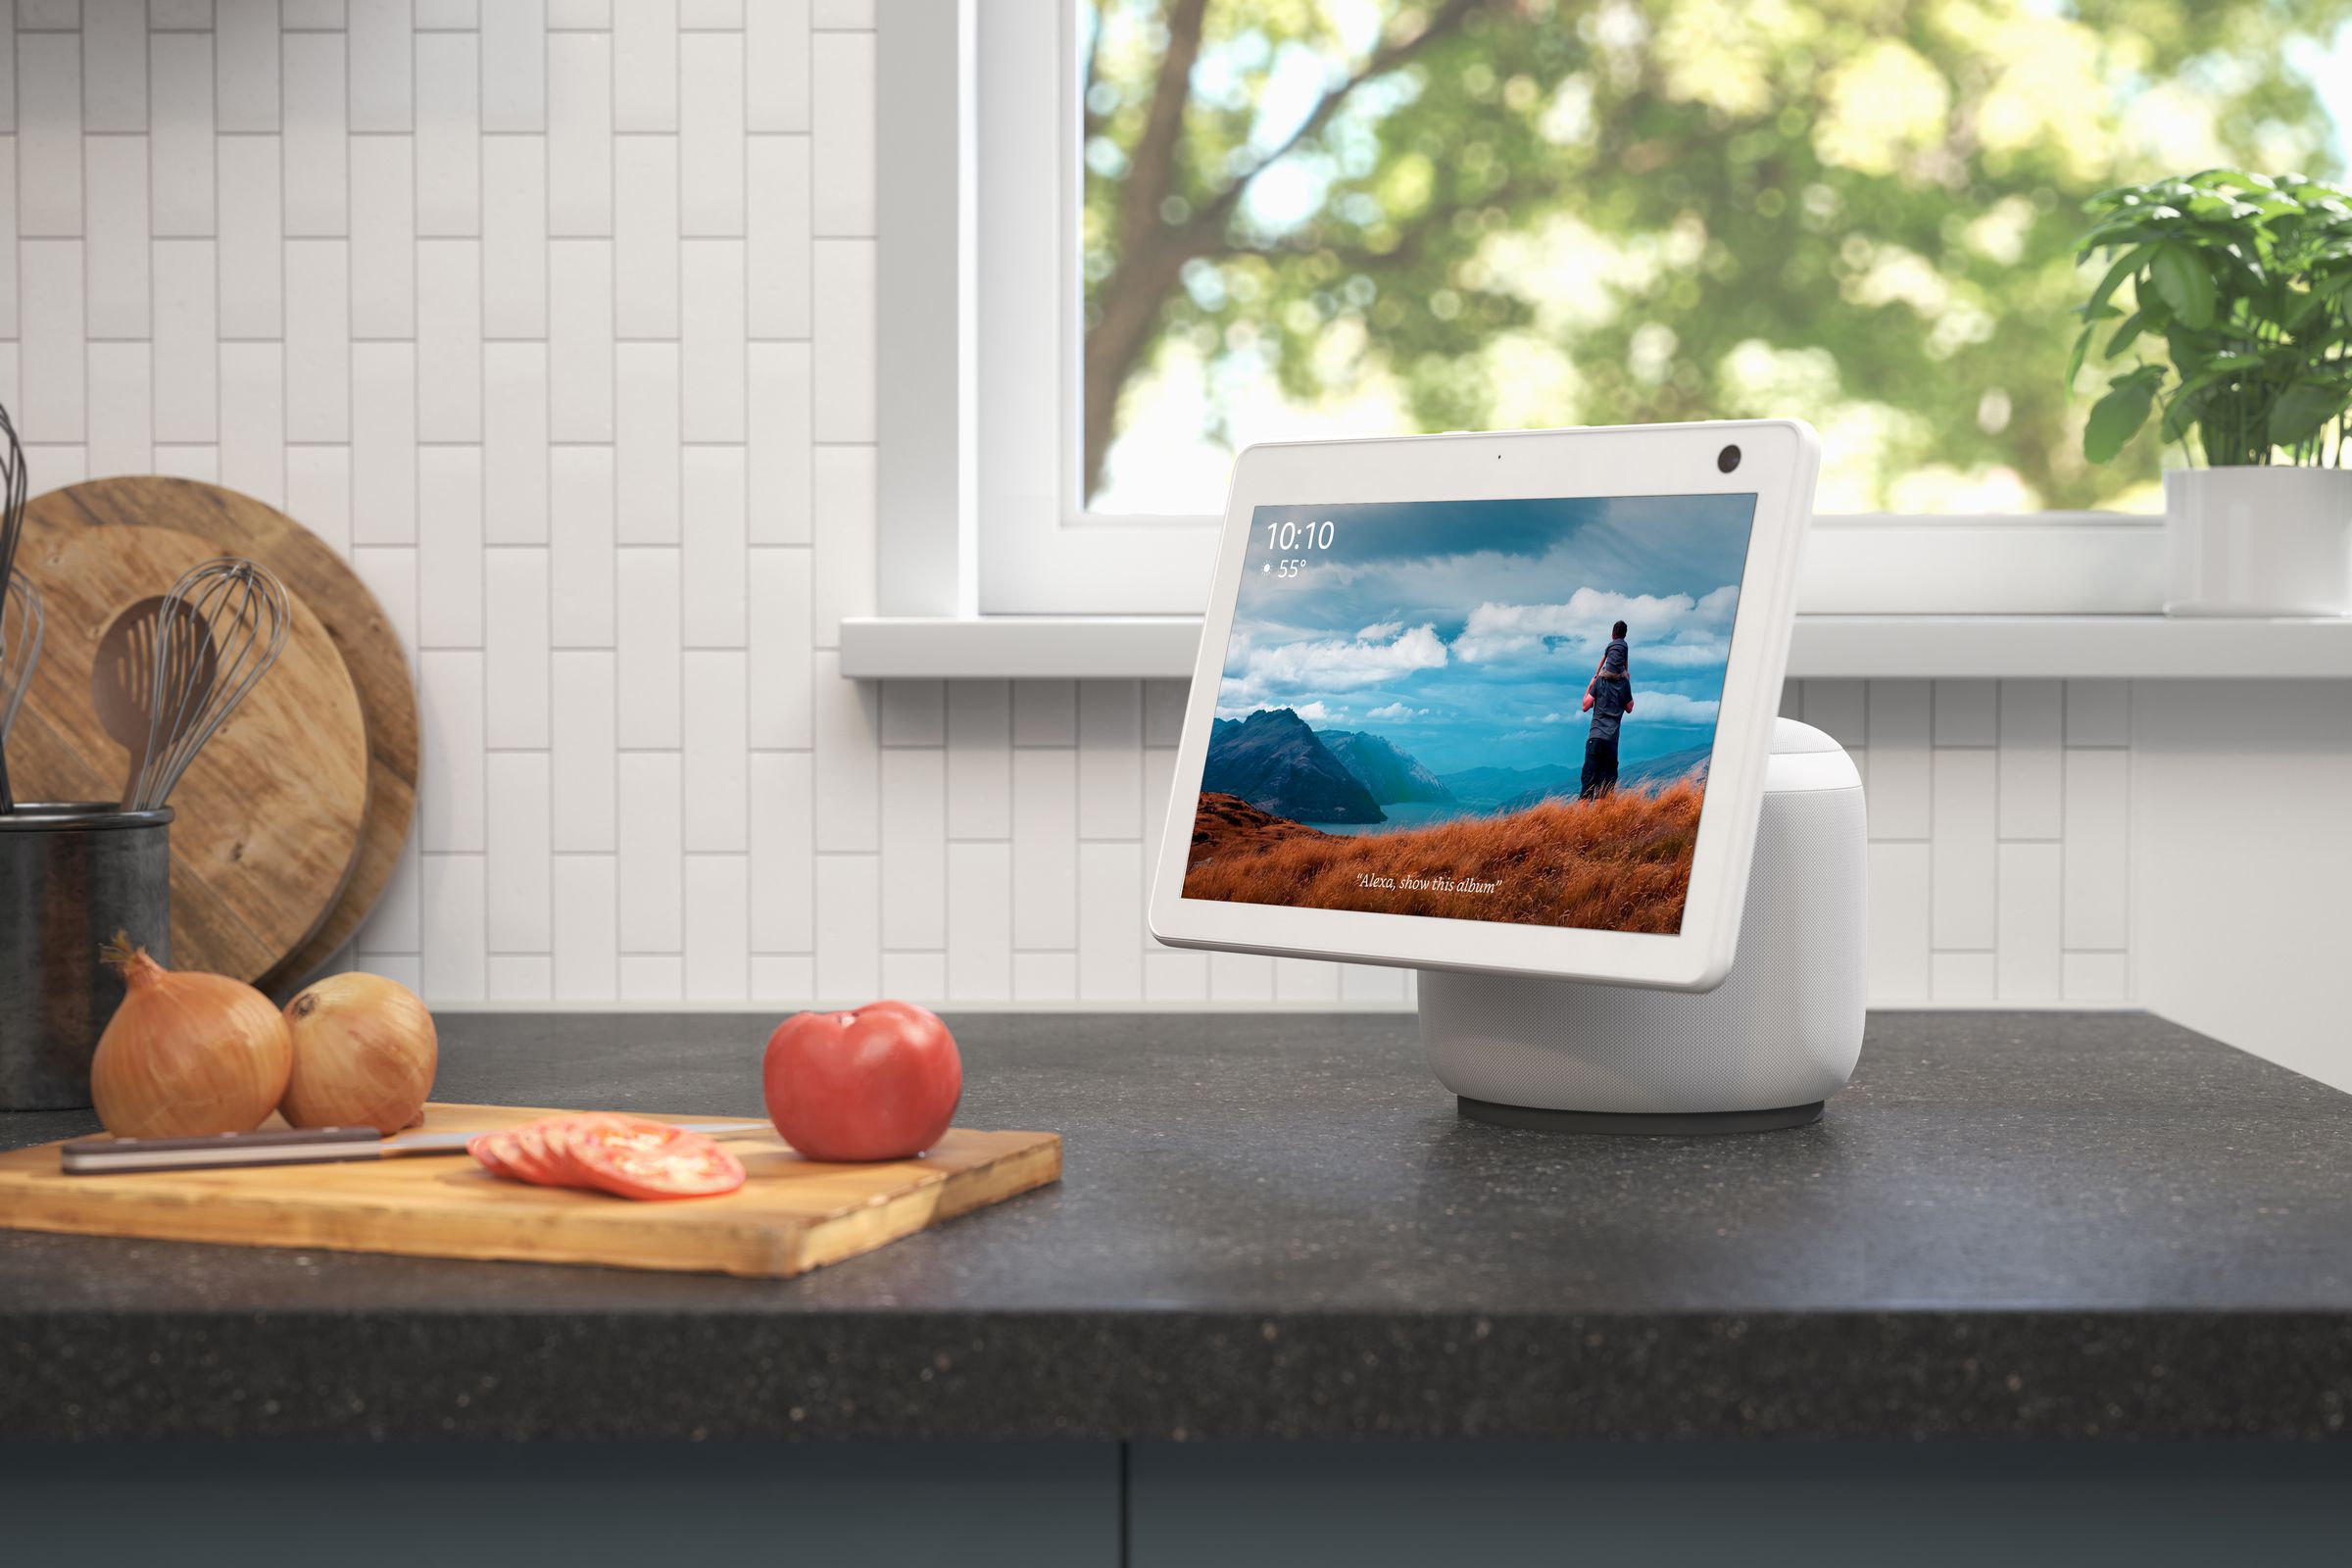 The unannounced device is likely to be much slimmer than previous devices like the Echo Show 10 (pictured).